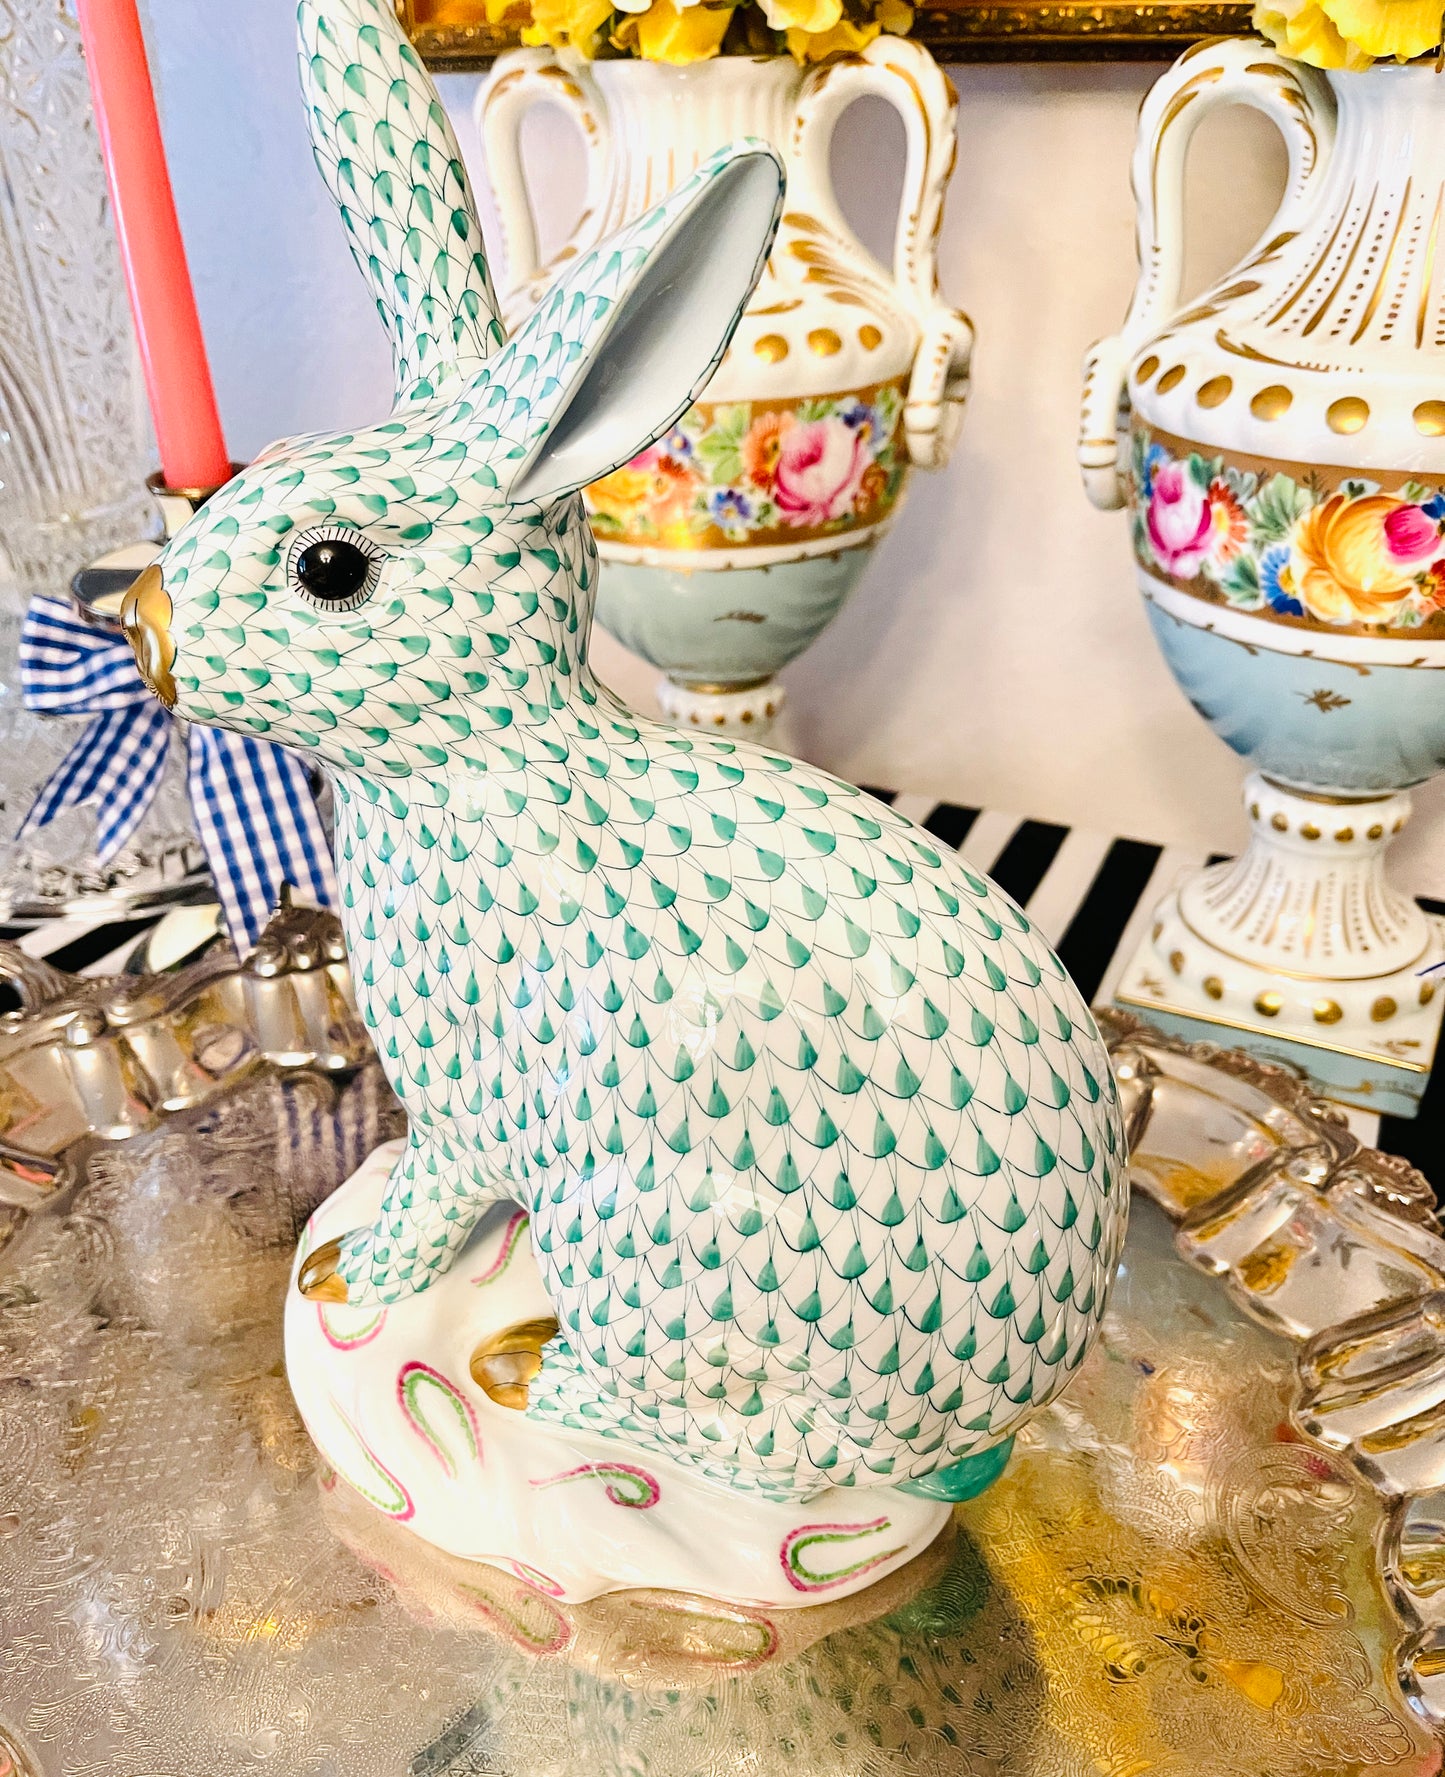 LARGE 11.75” Herend Rabbit, Hand Painted Porcelain with 22kt Gold Detail